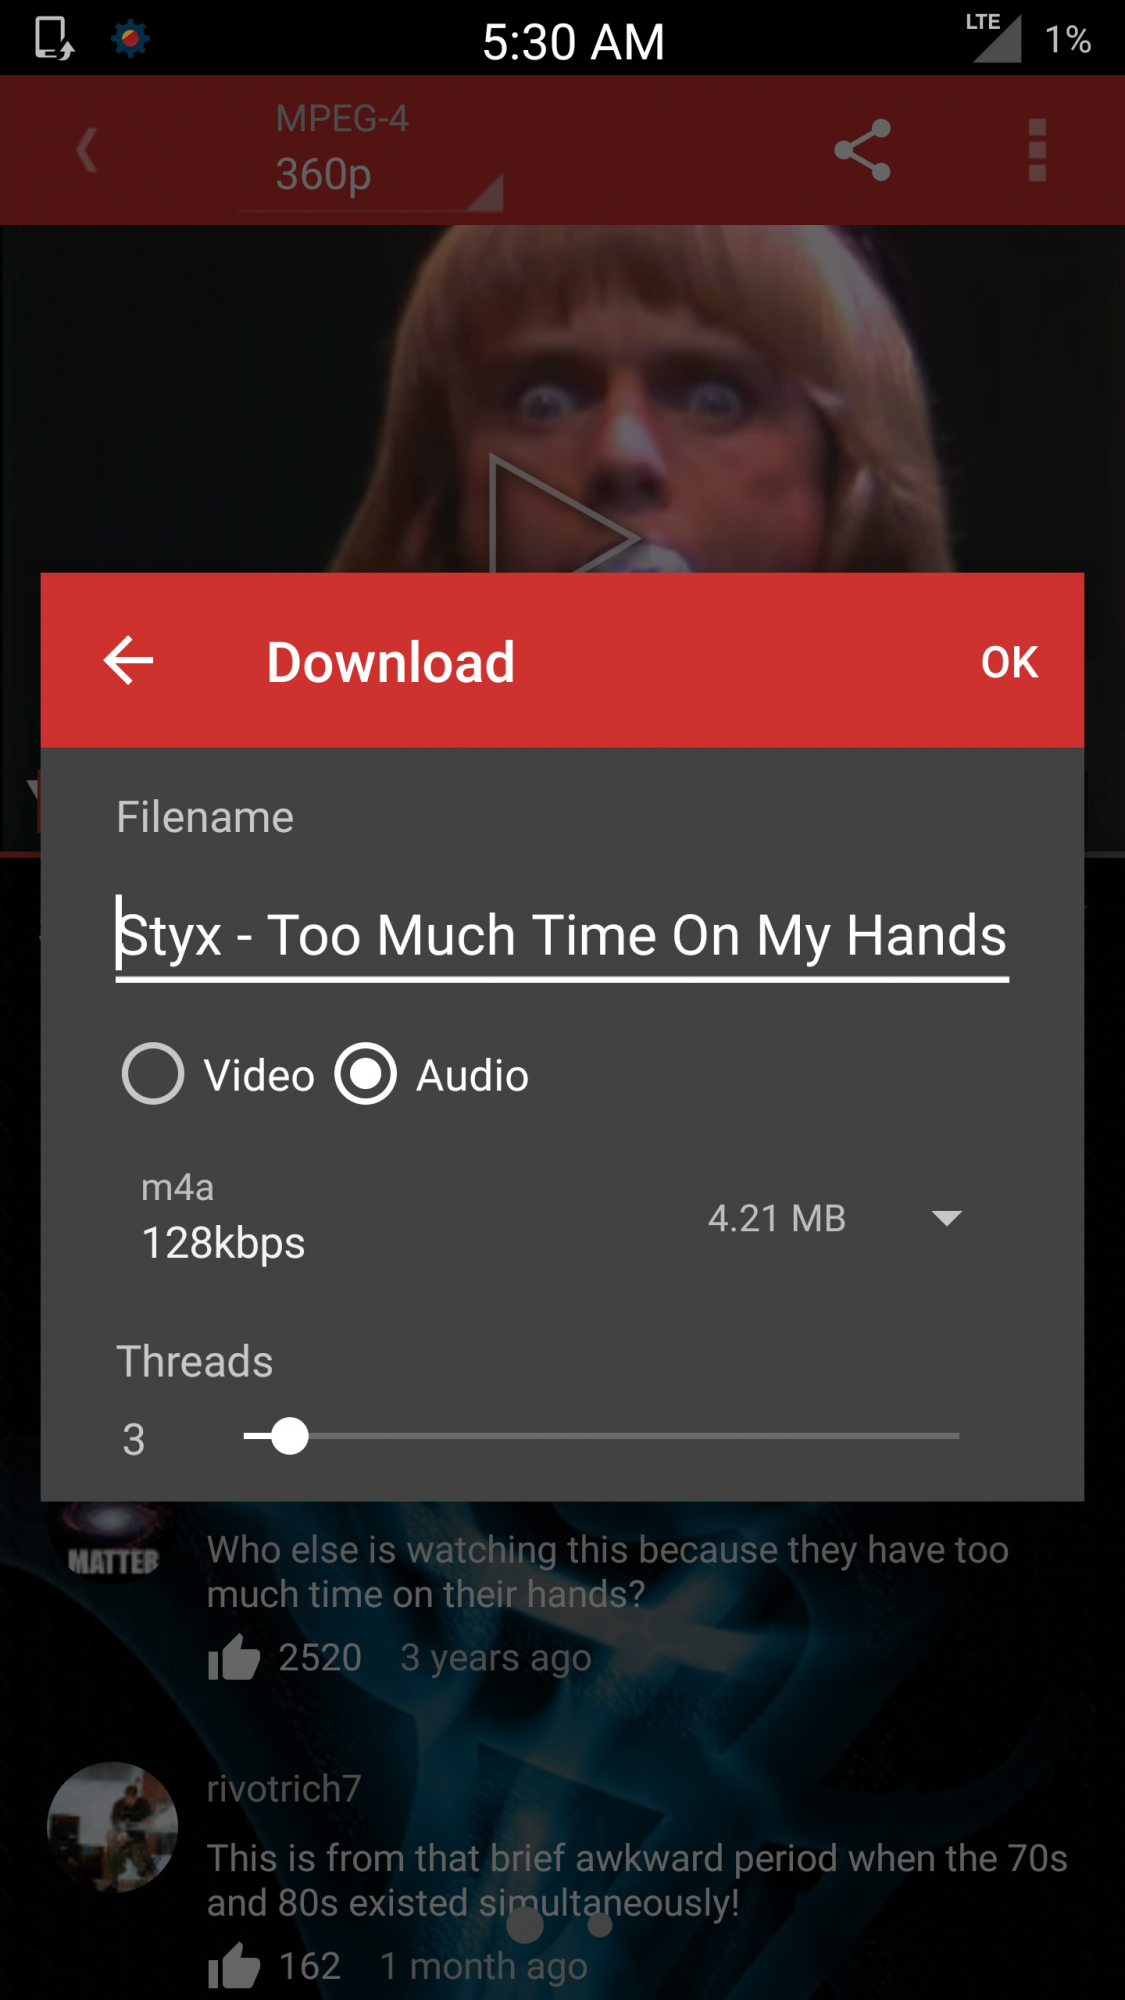 Convert mp4 to mp3 - Android Lounge | Android Forums